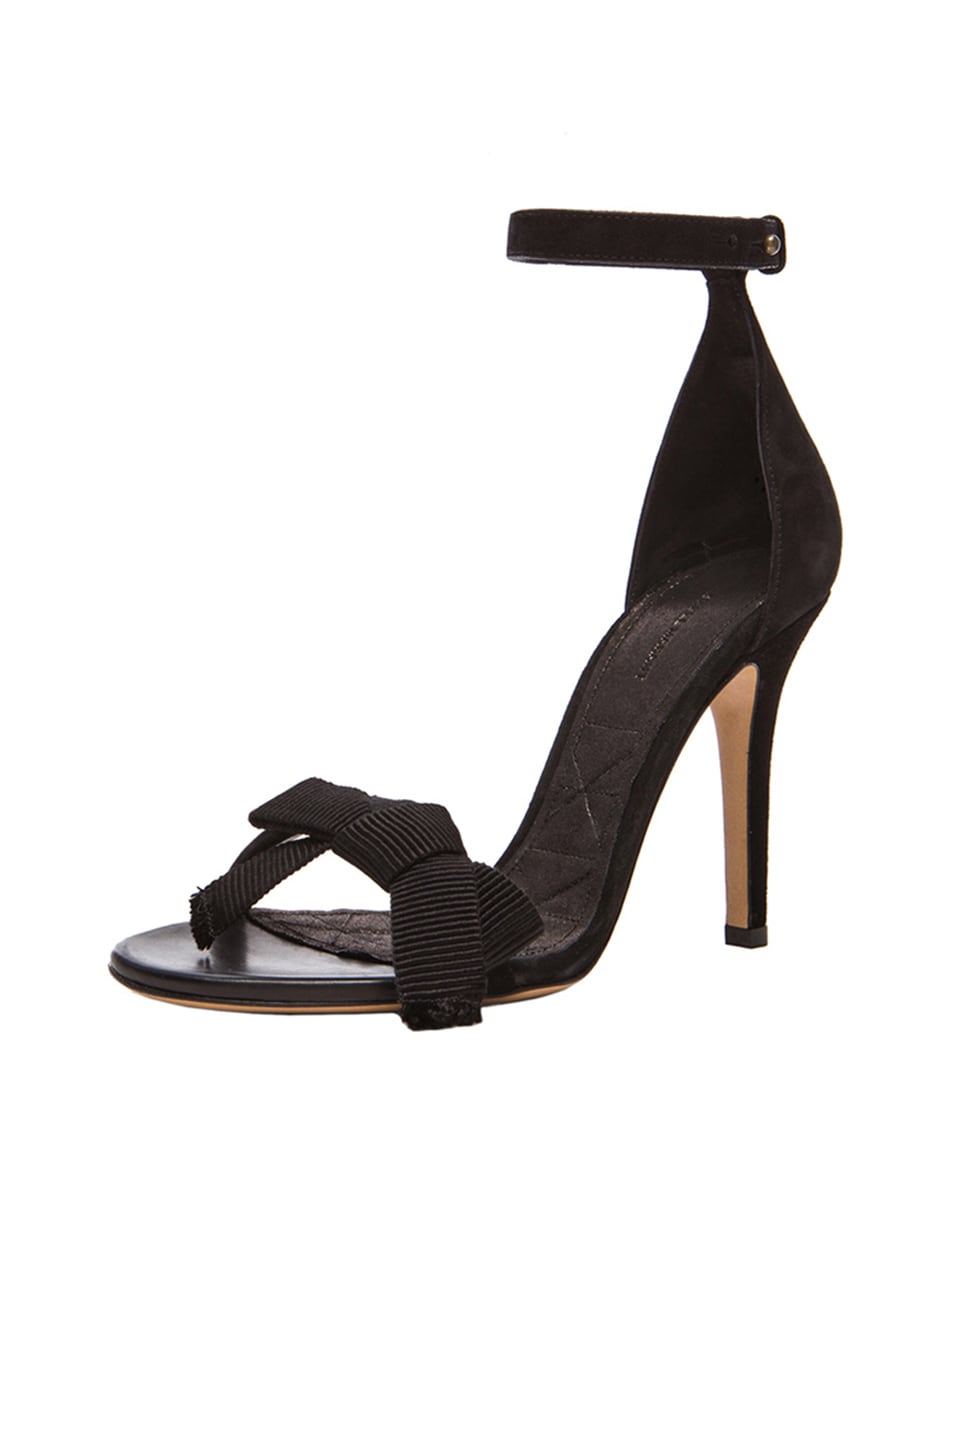 Isabel Marant Play Easy Suede Evening Sandals in Black | FWRD